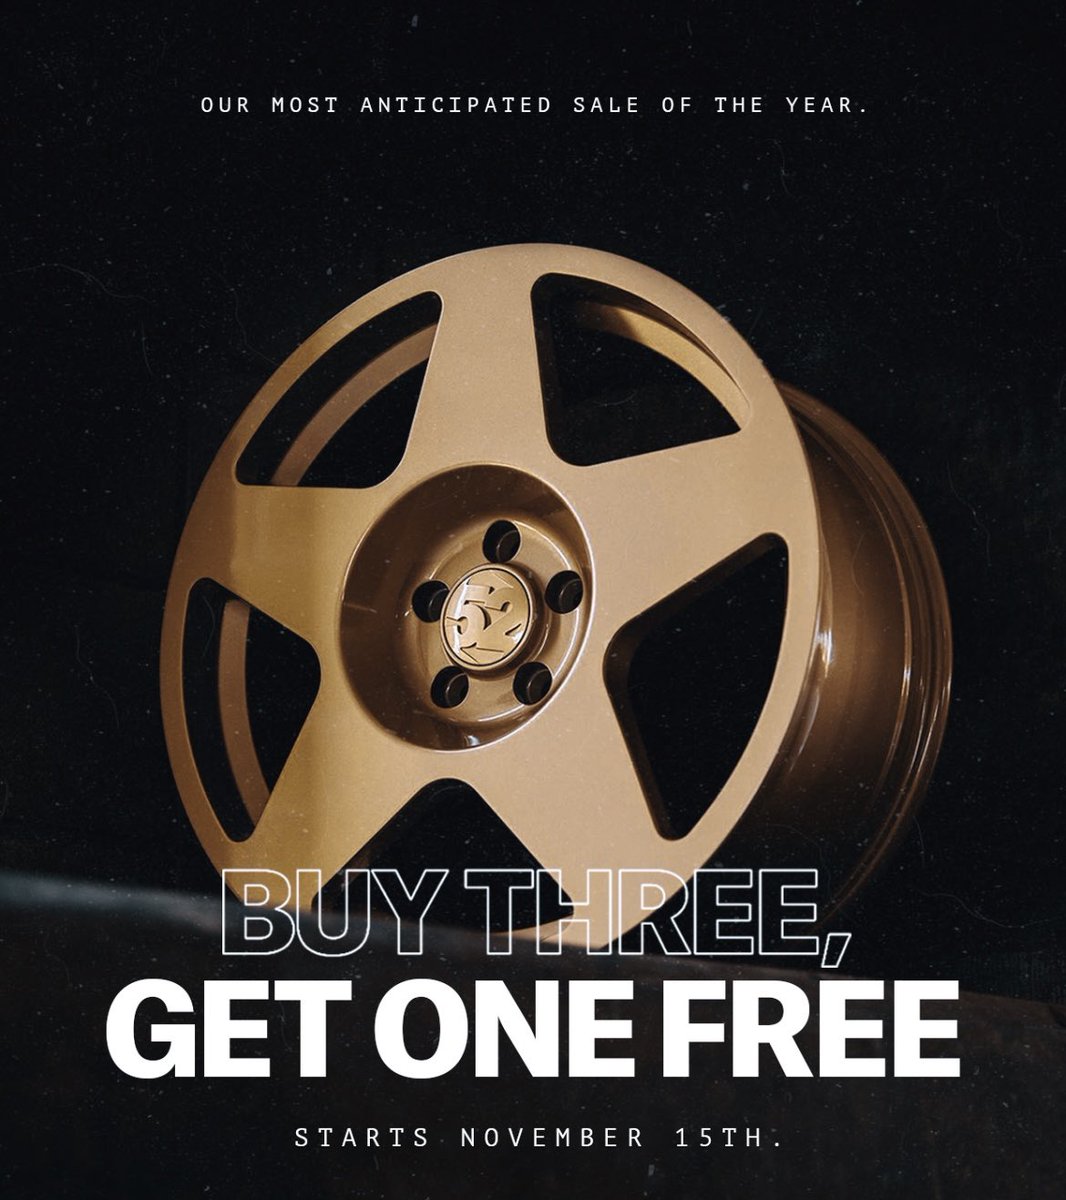 Our most anticipated sale of the year is back — BUY 3, GET 1 FREE. Get yourself the set of wheels you’ve been dreaming of 👉 fifteen52.com

#blackfriday / #wheels / #fifteen52 / #sale / #buy3get1free